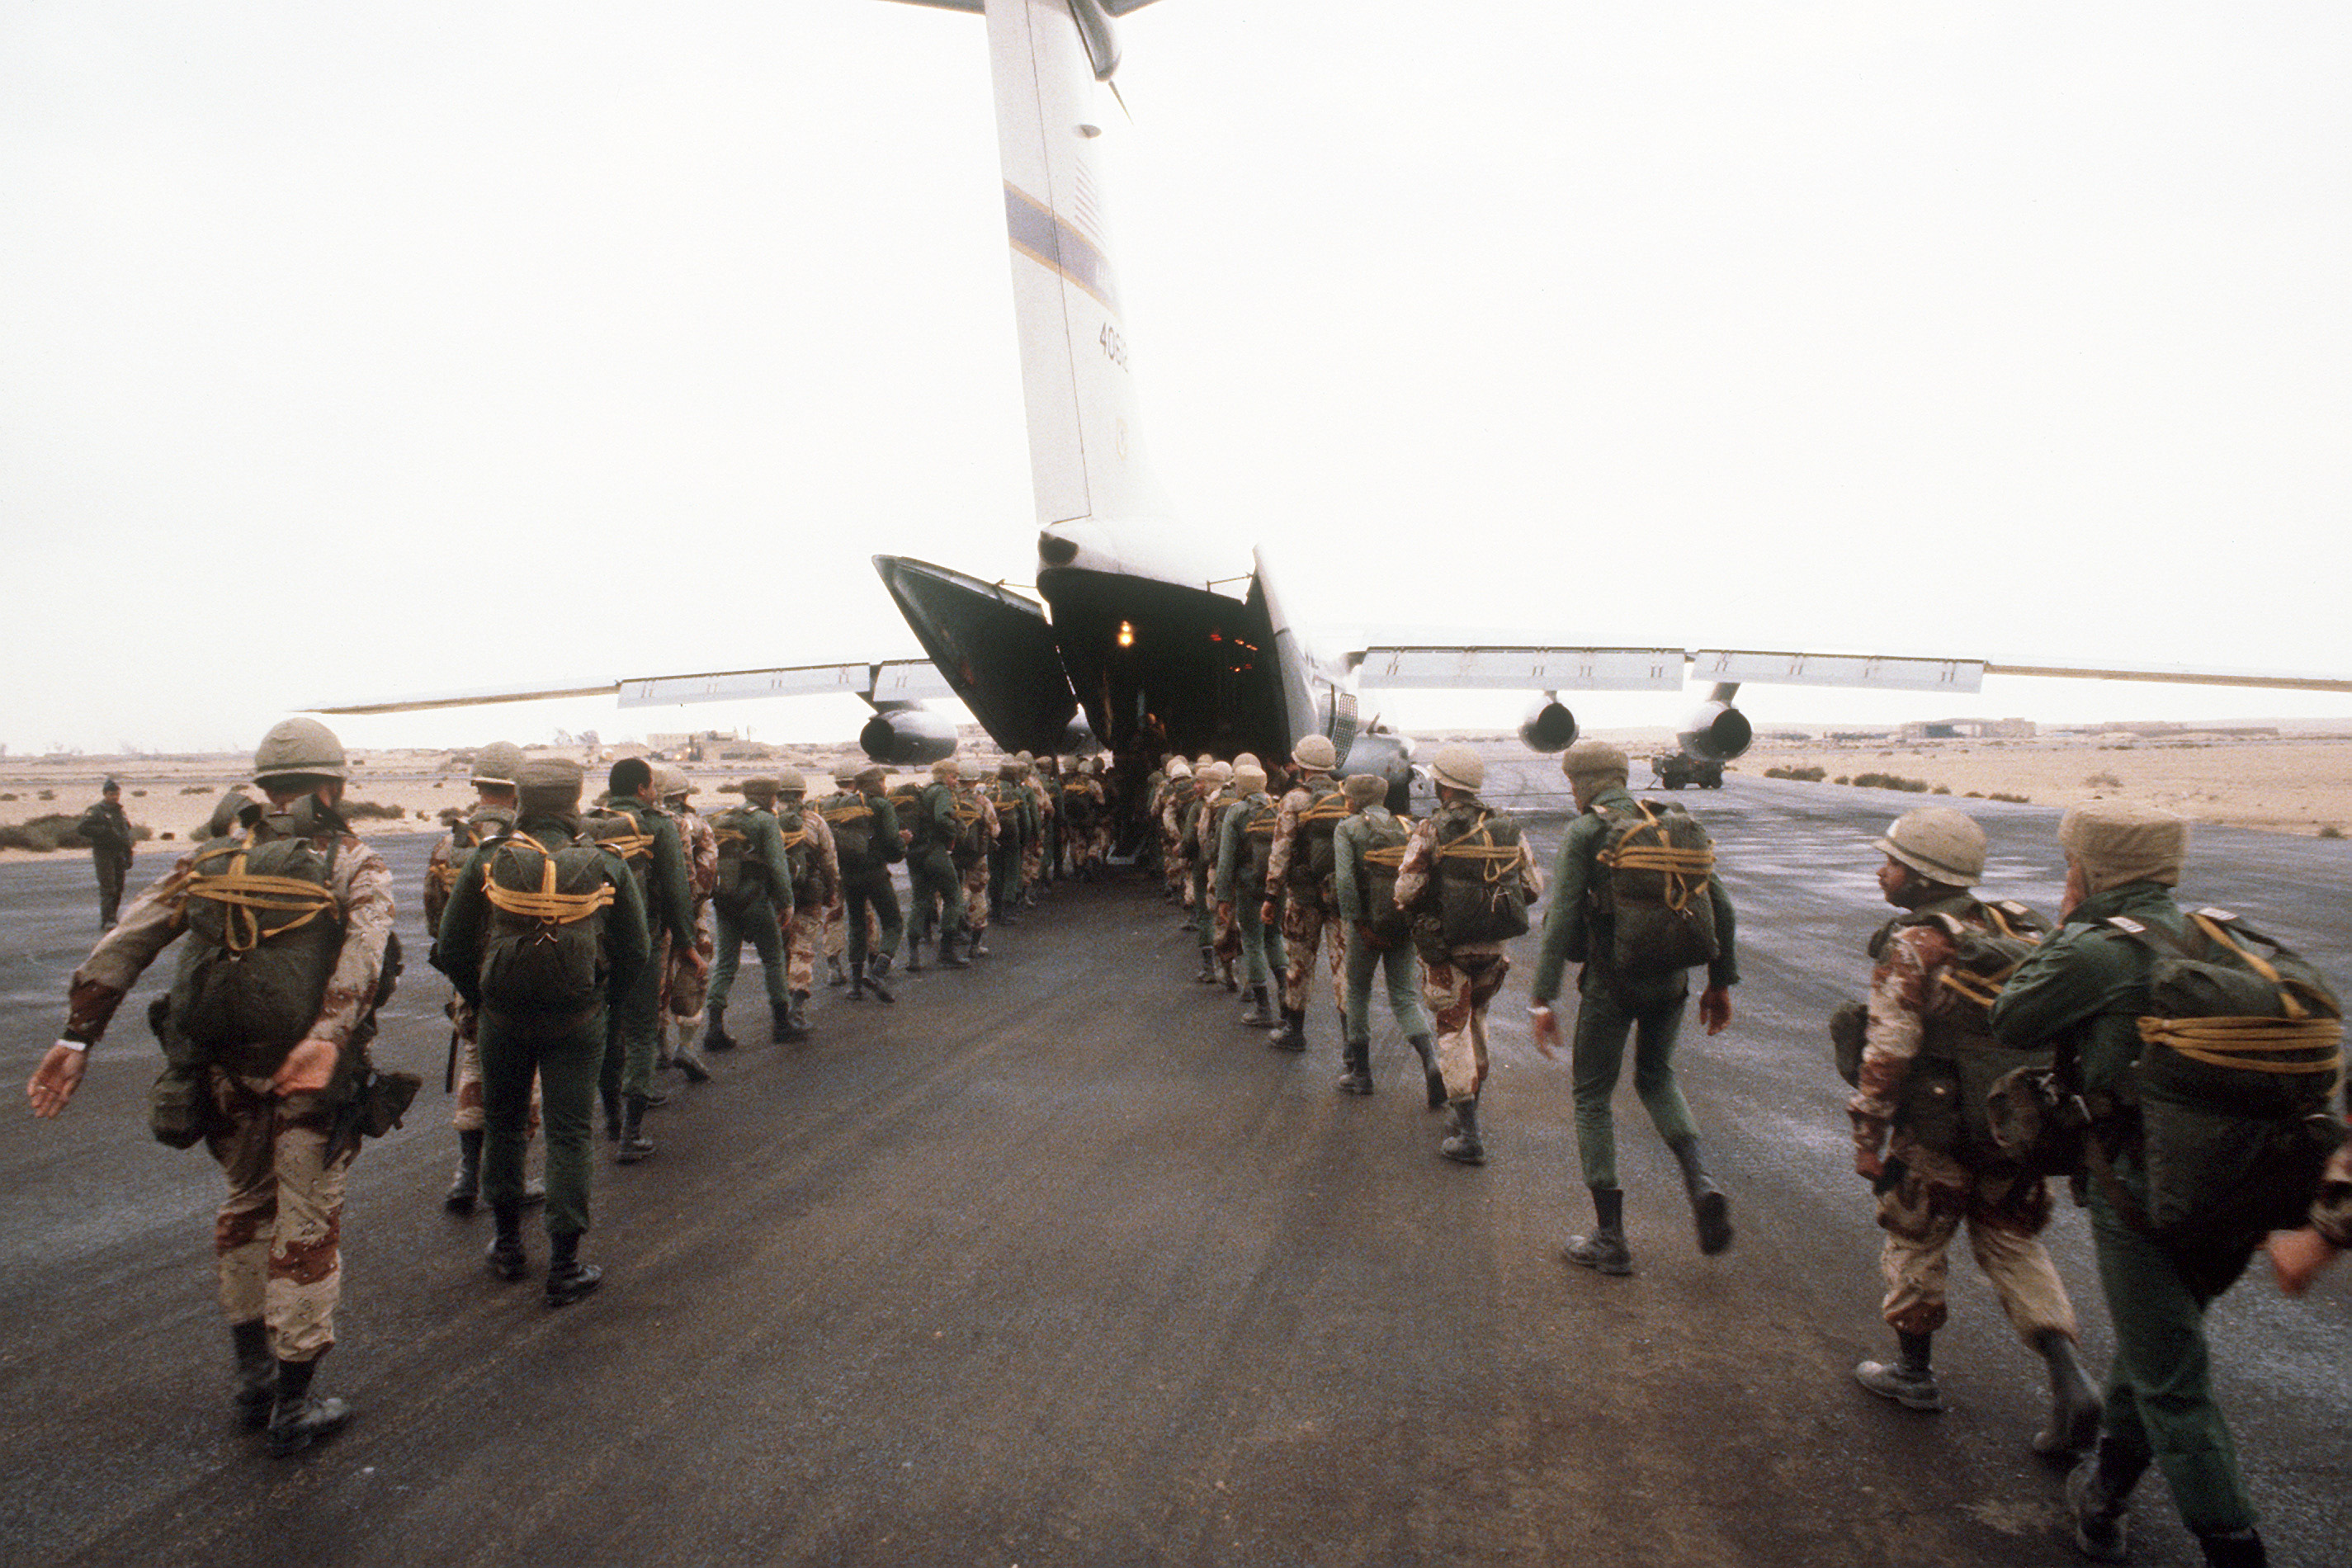 Egyptian_and_U.S._troops_board_a_C-141_Starlifter_aircraft_during_-Exercise_Bright_Star_'82_DF-ST-82-10034.jpg